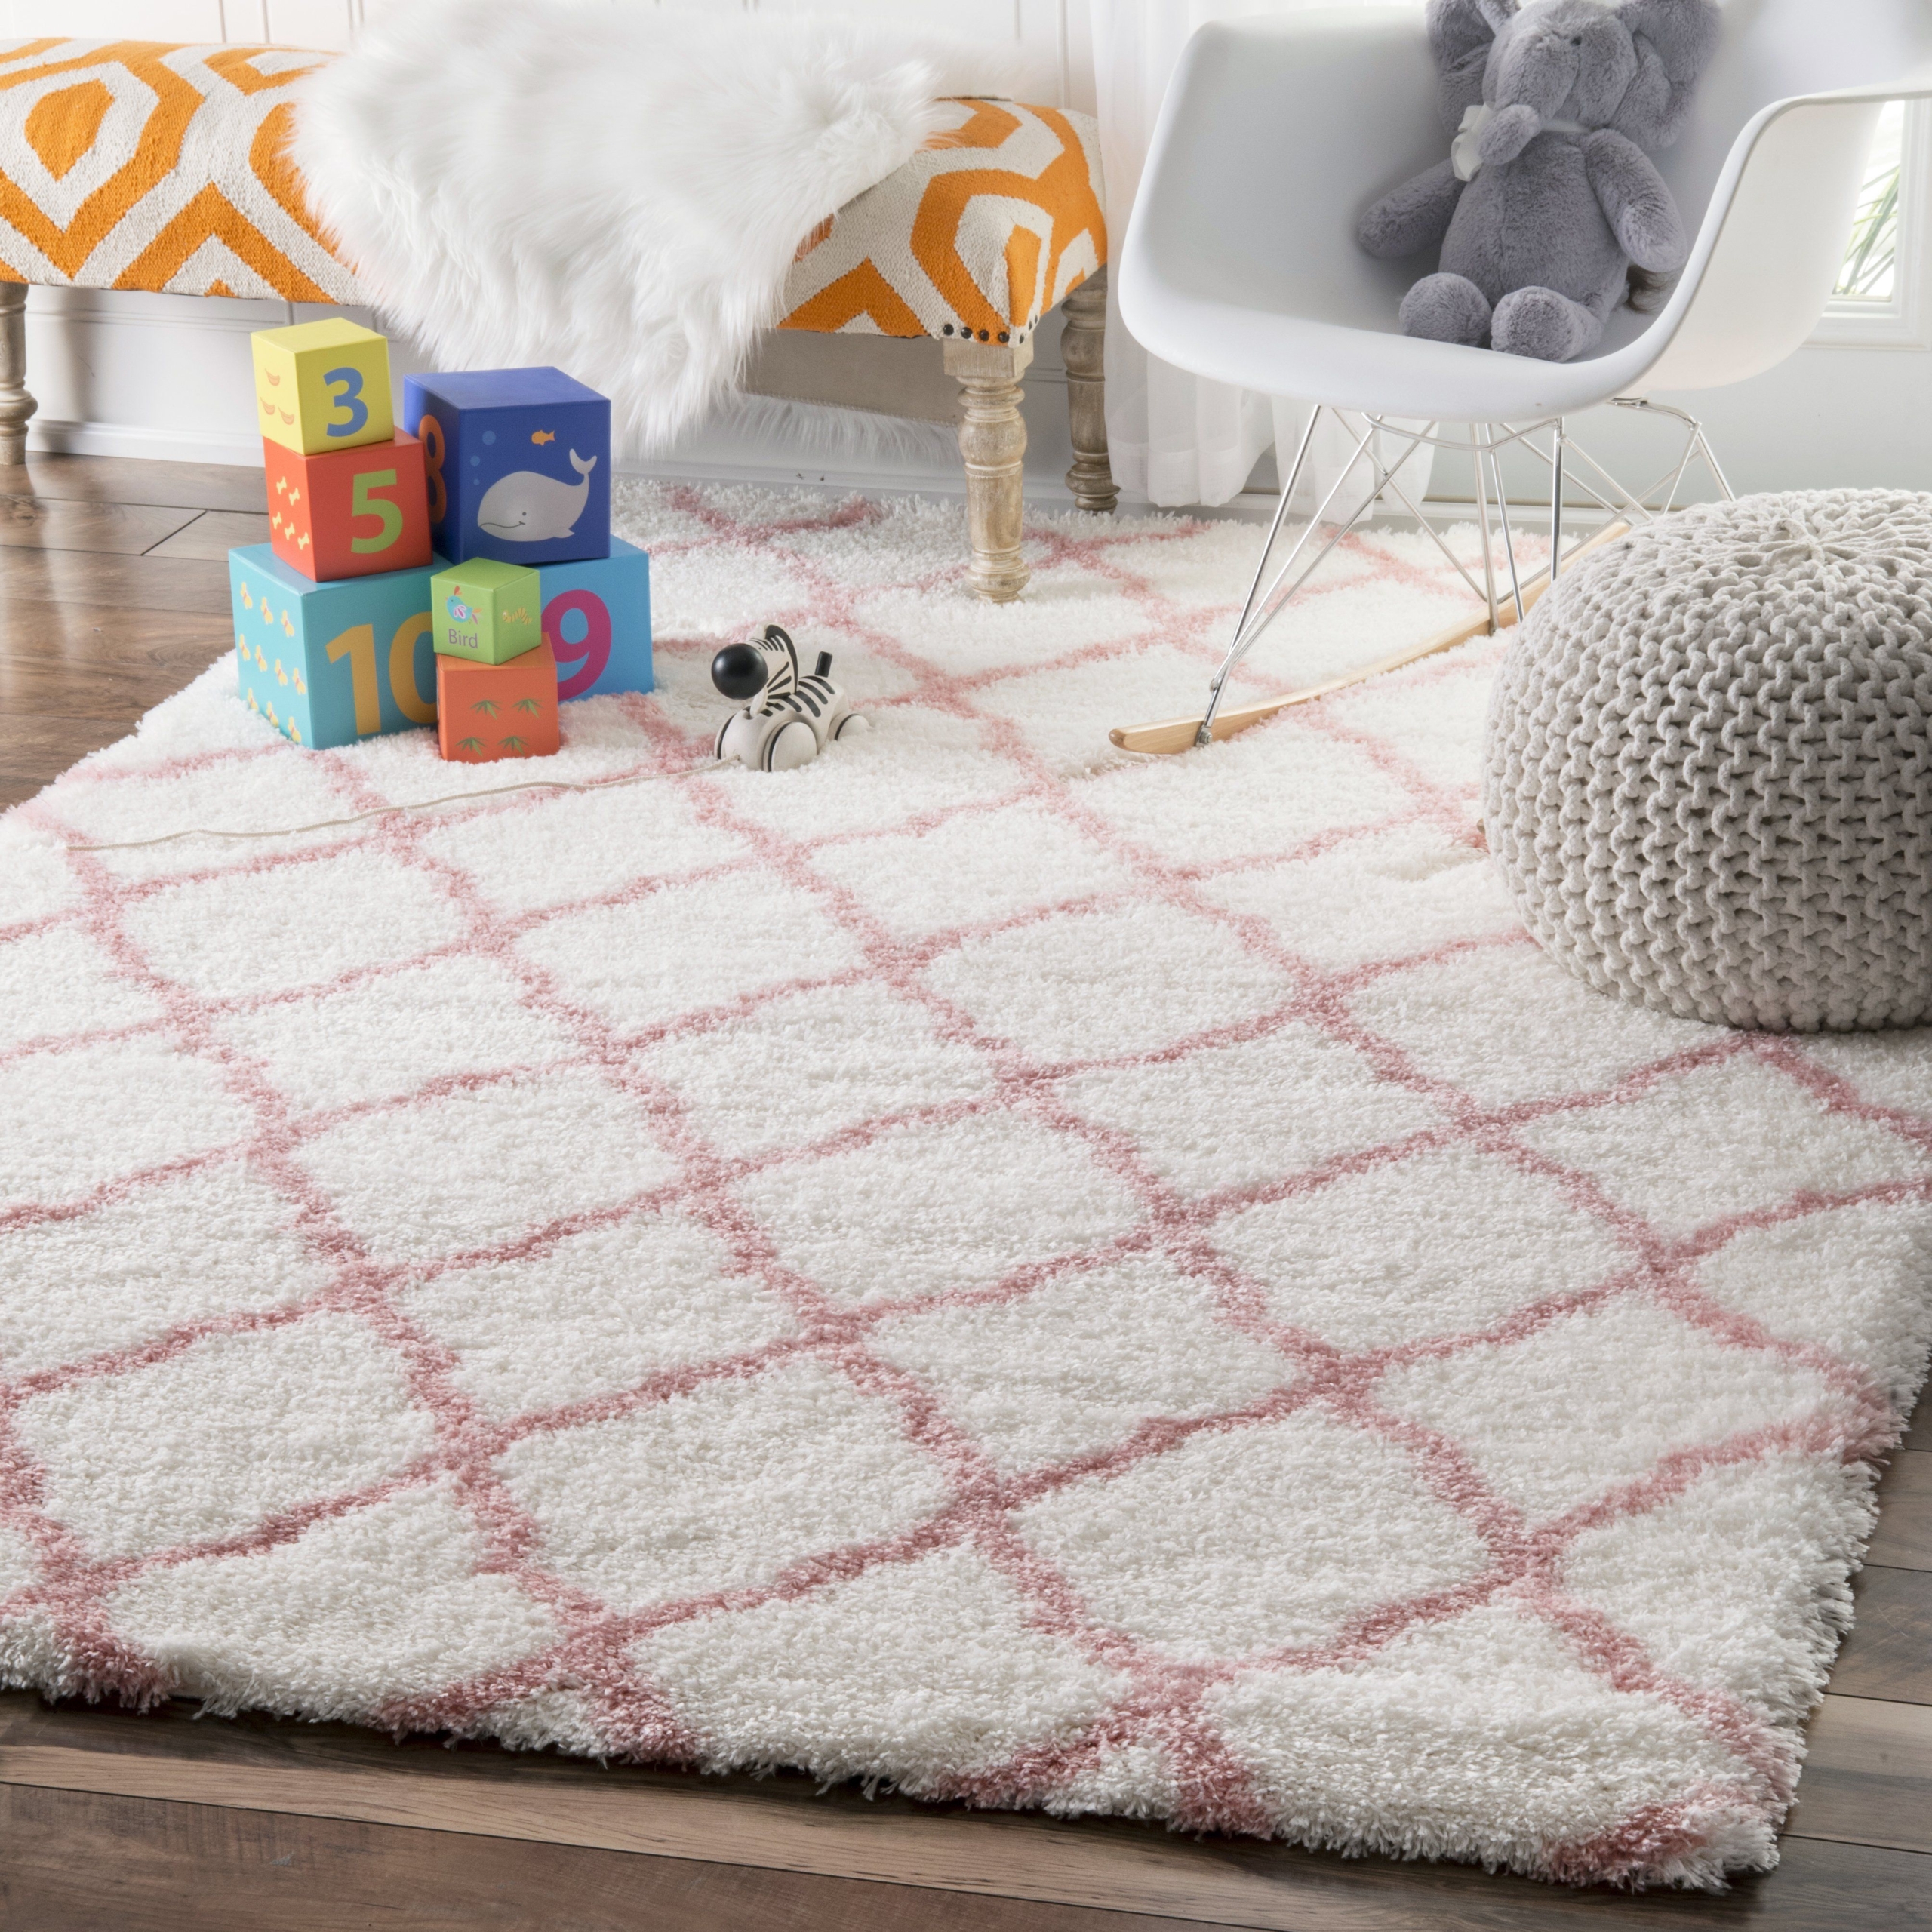 Pink Rug For Nursery Visualhunt, Pink Area Rugs For Baby Nursery